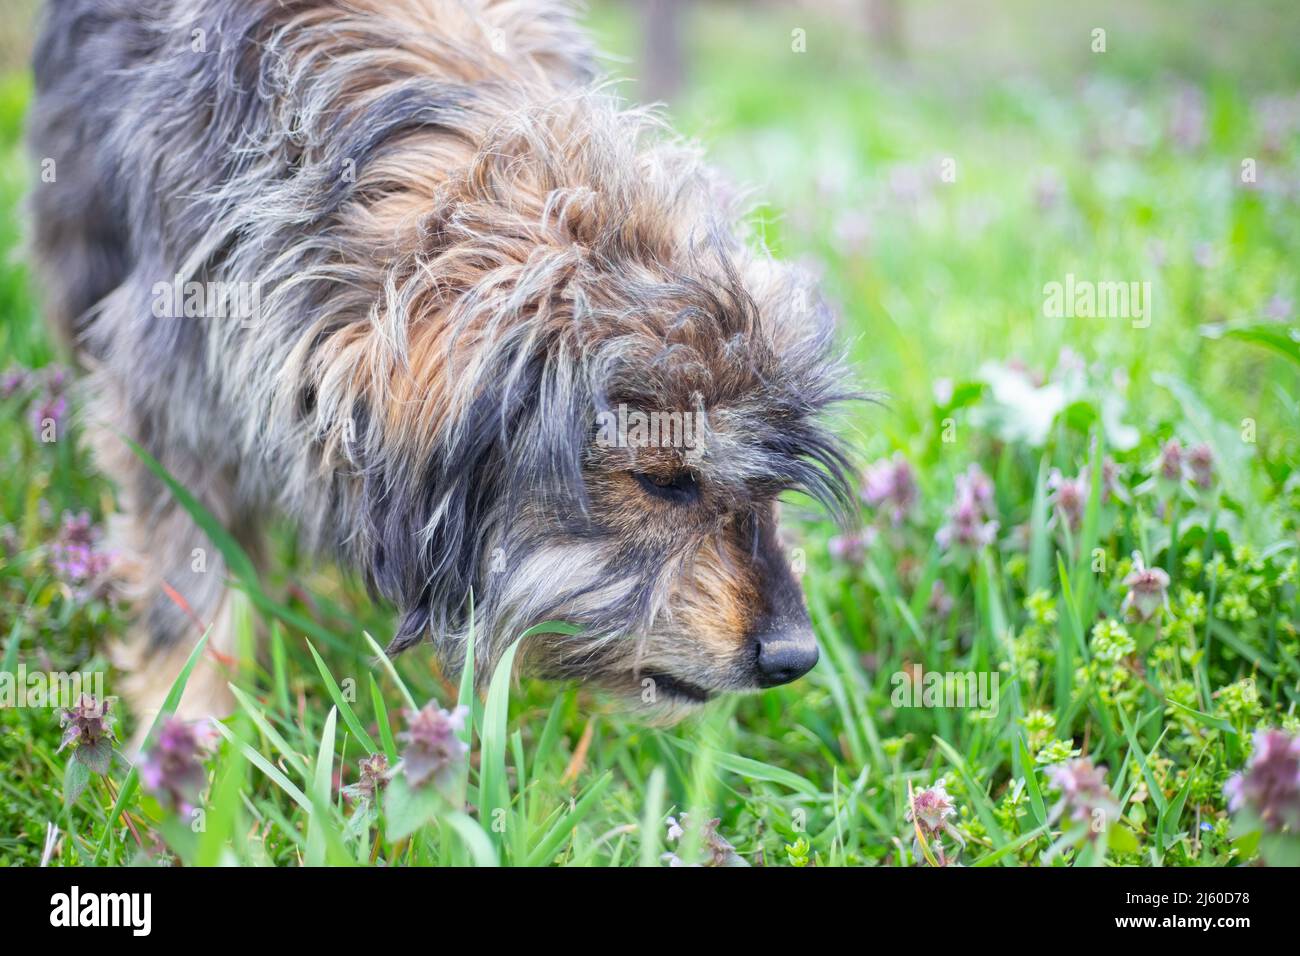 Shaggy dog sniffs spring flowers on a sunny day. Animals and nature. Stock Photo